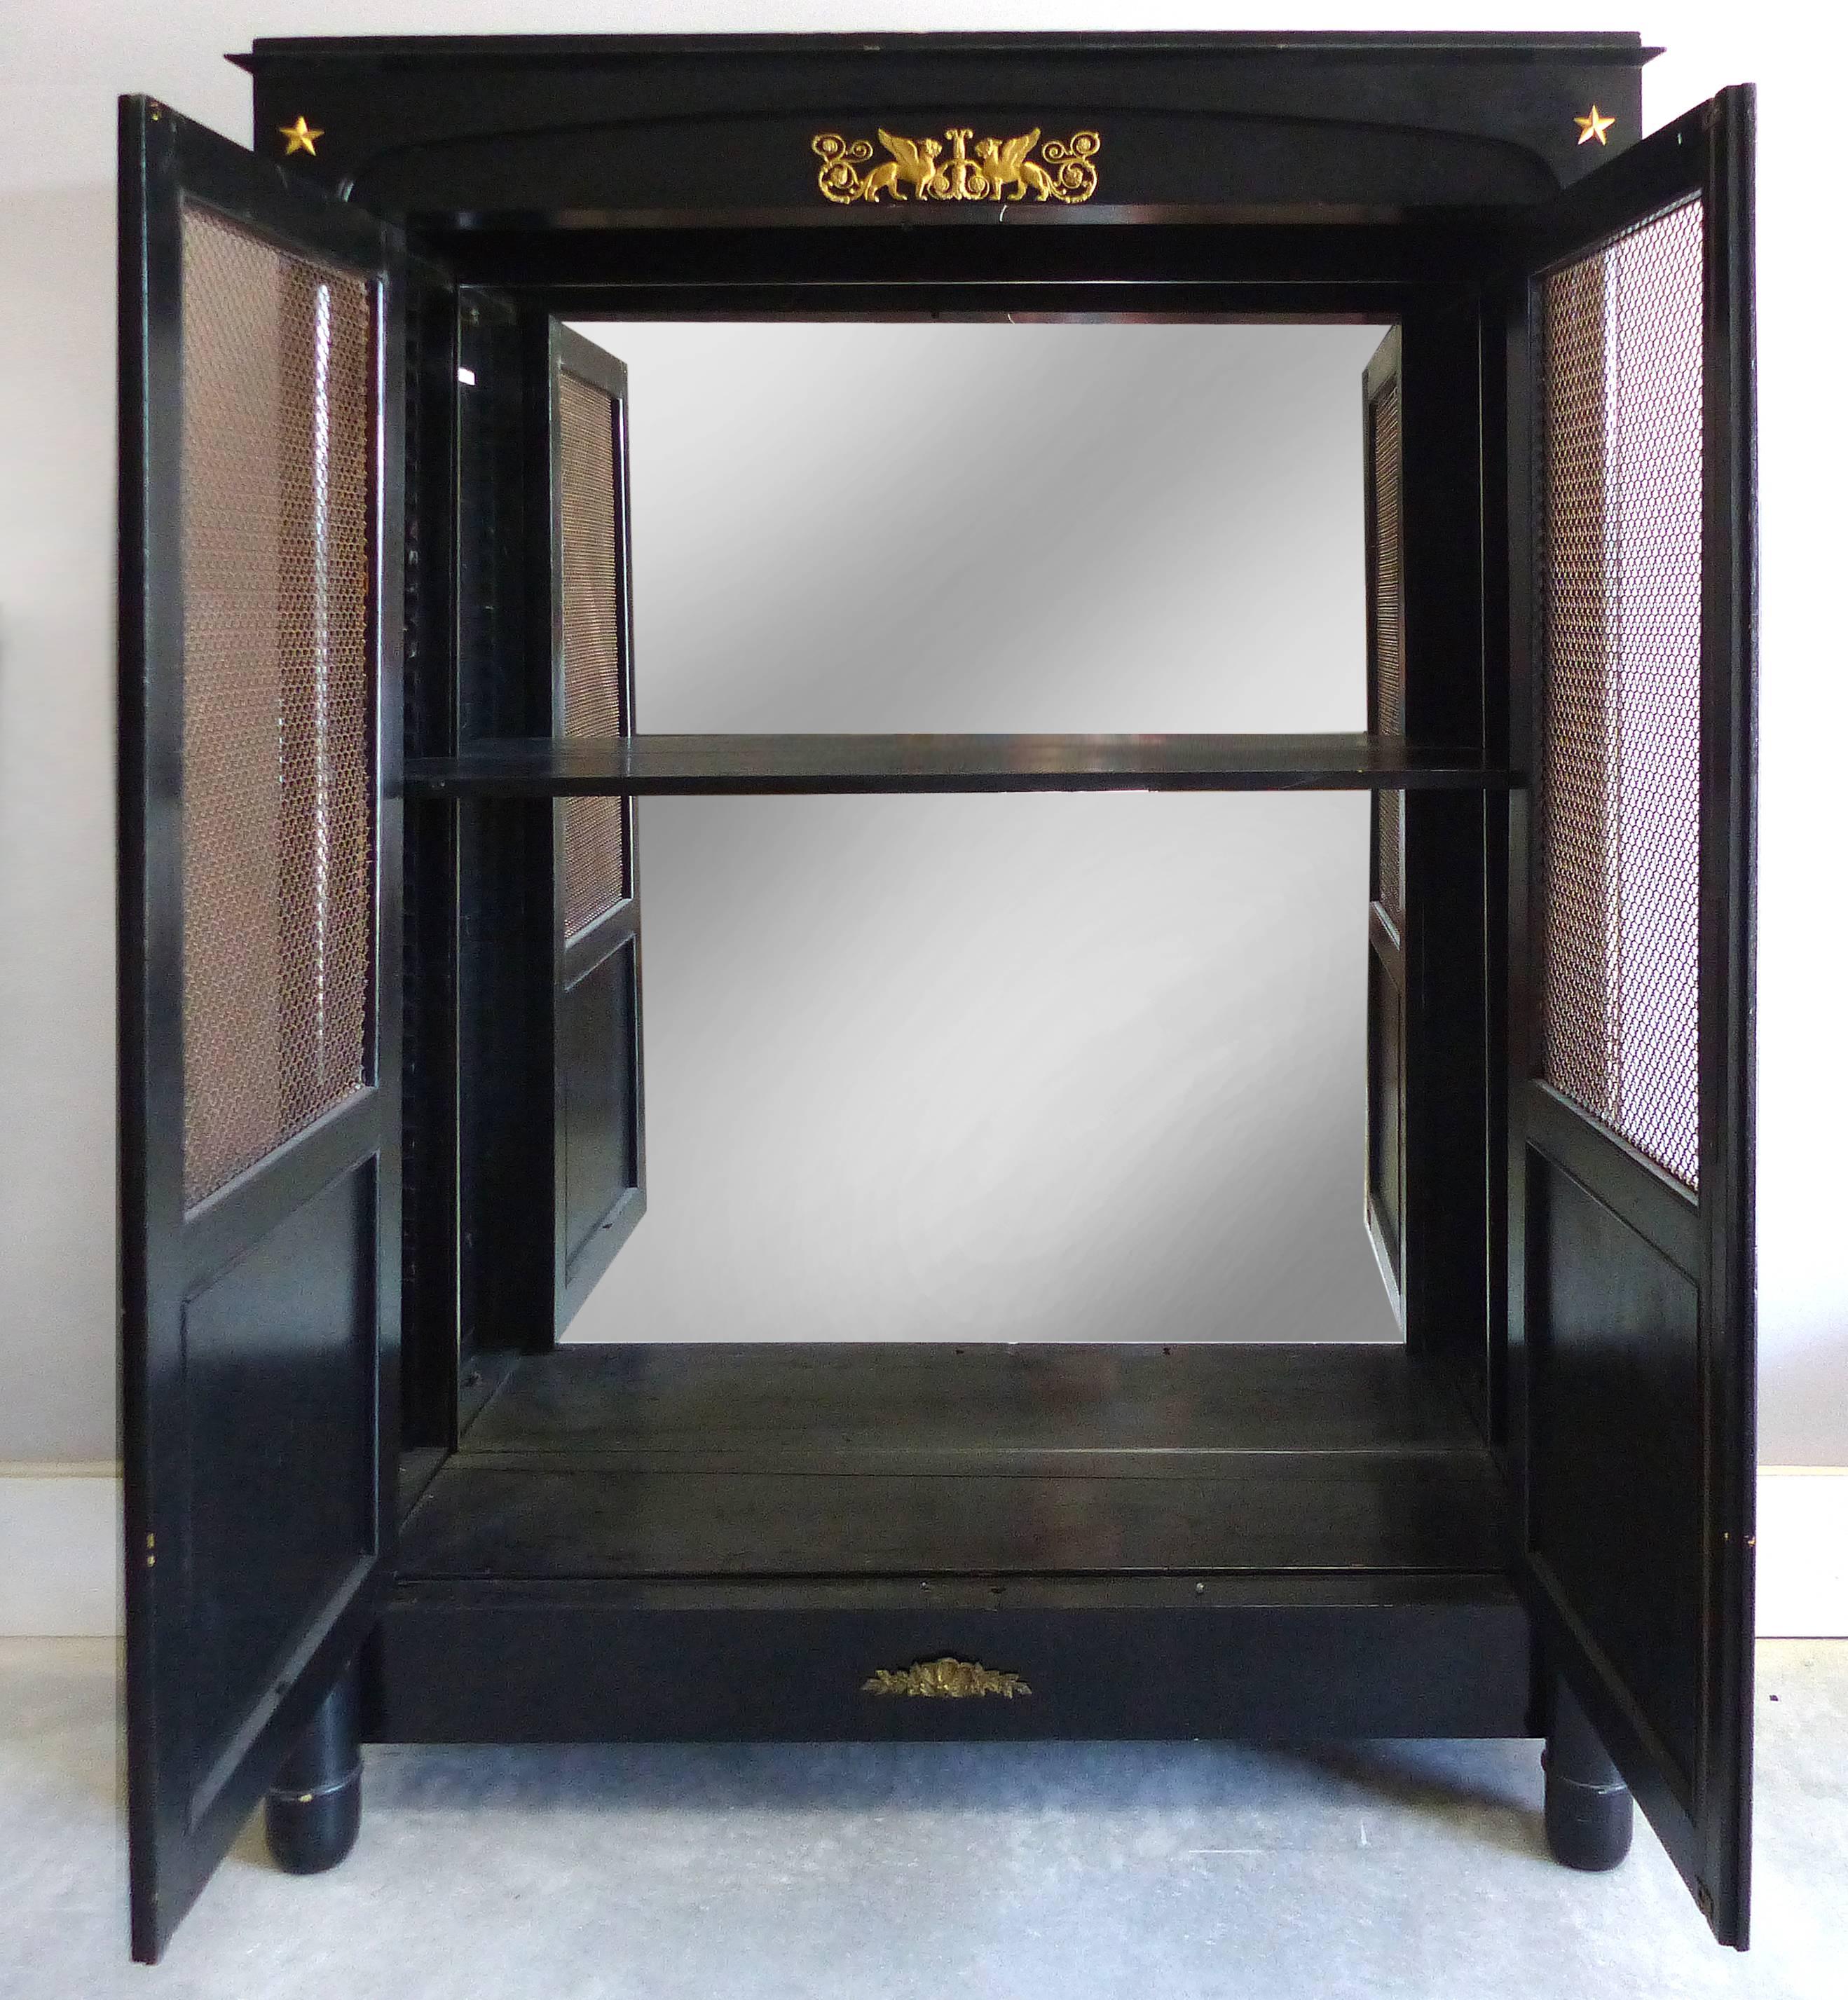 French Empire Lacquered Bibliotheque with Bronze Trellis Doors and Ormolu

Offered is a fine quality lacquered 19th century, French Empire Bibliotheque bookcase with bronze trellis work doors and finely chased bronze ormolu mounts. The mounts depict